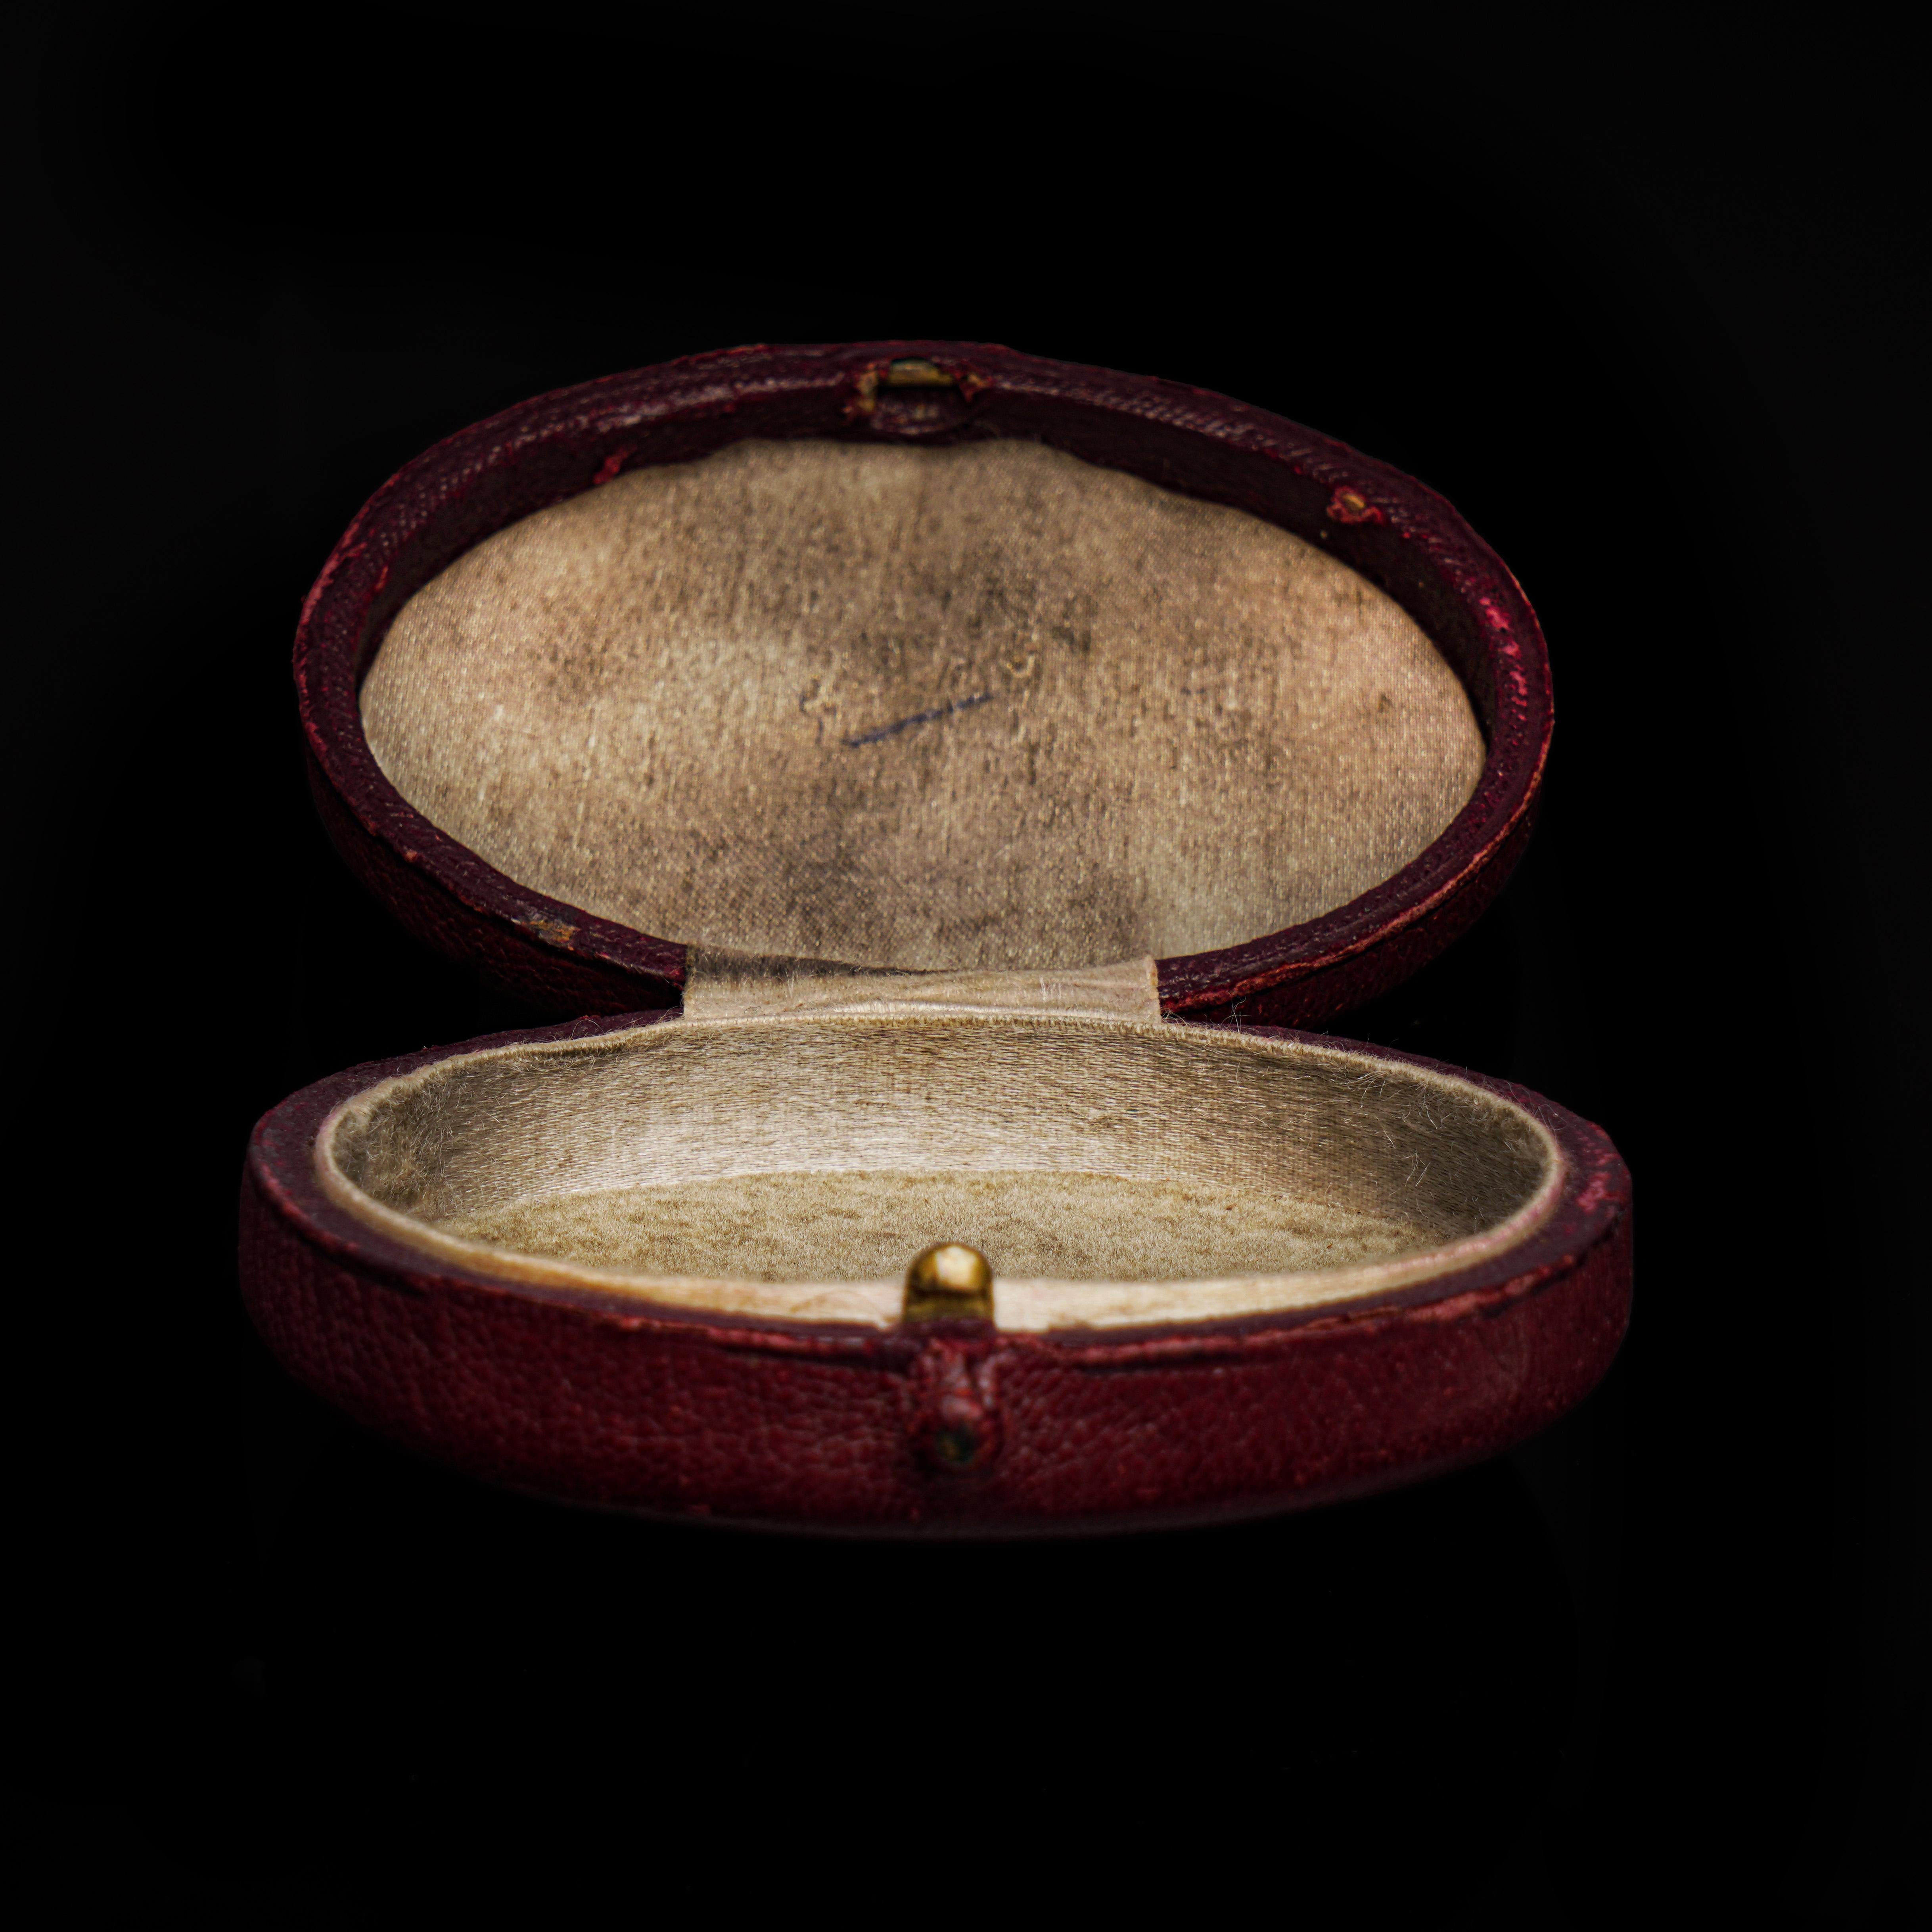 Antique Harrods jewellery display case.

Dimensions: 
Length x width x depth: 7.8 x 5.5 x 2.5 cm 
Weight: 27 grams 

Condition: Antique original condition, minor wear and tear. 

Harrods Antique Boxes is a revered institution in the world of luxury